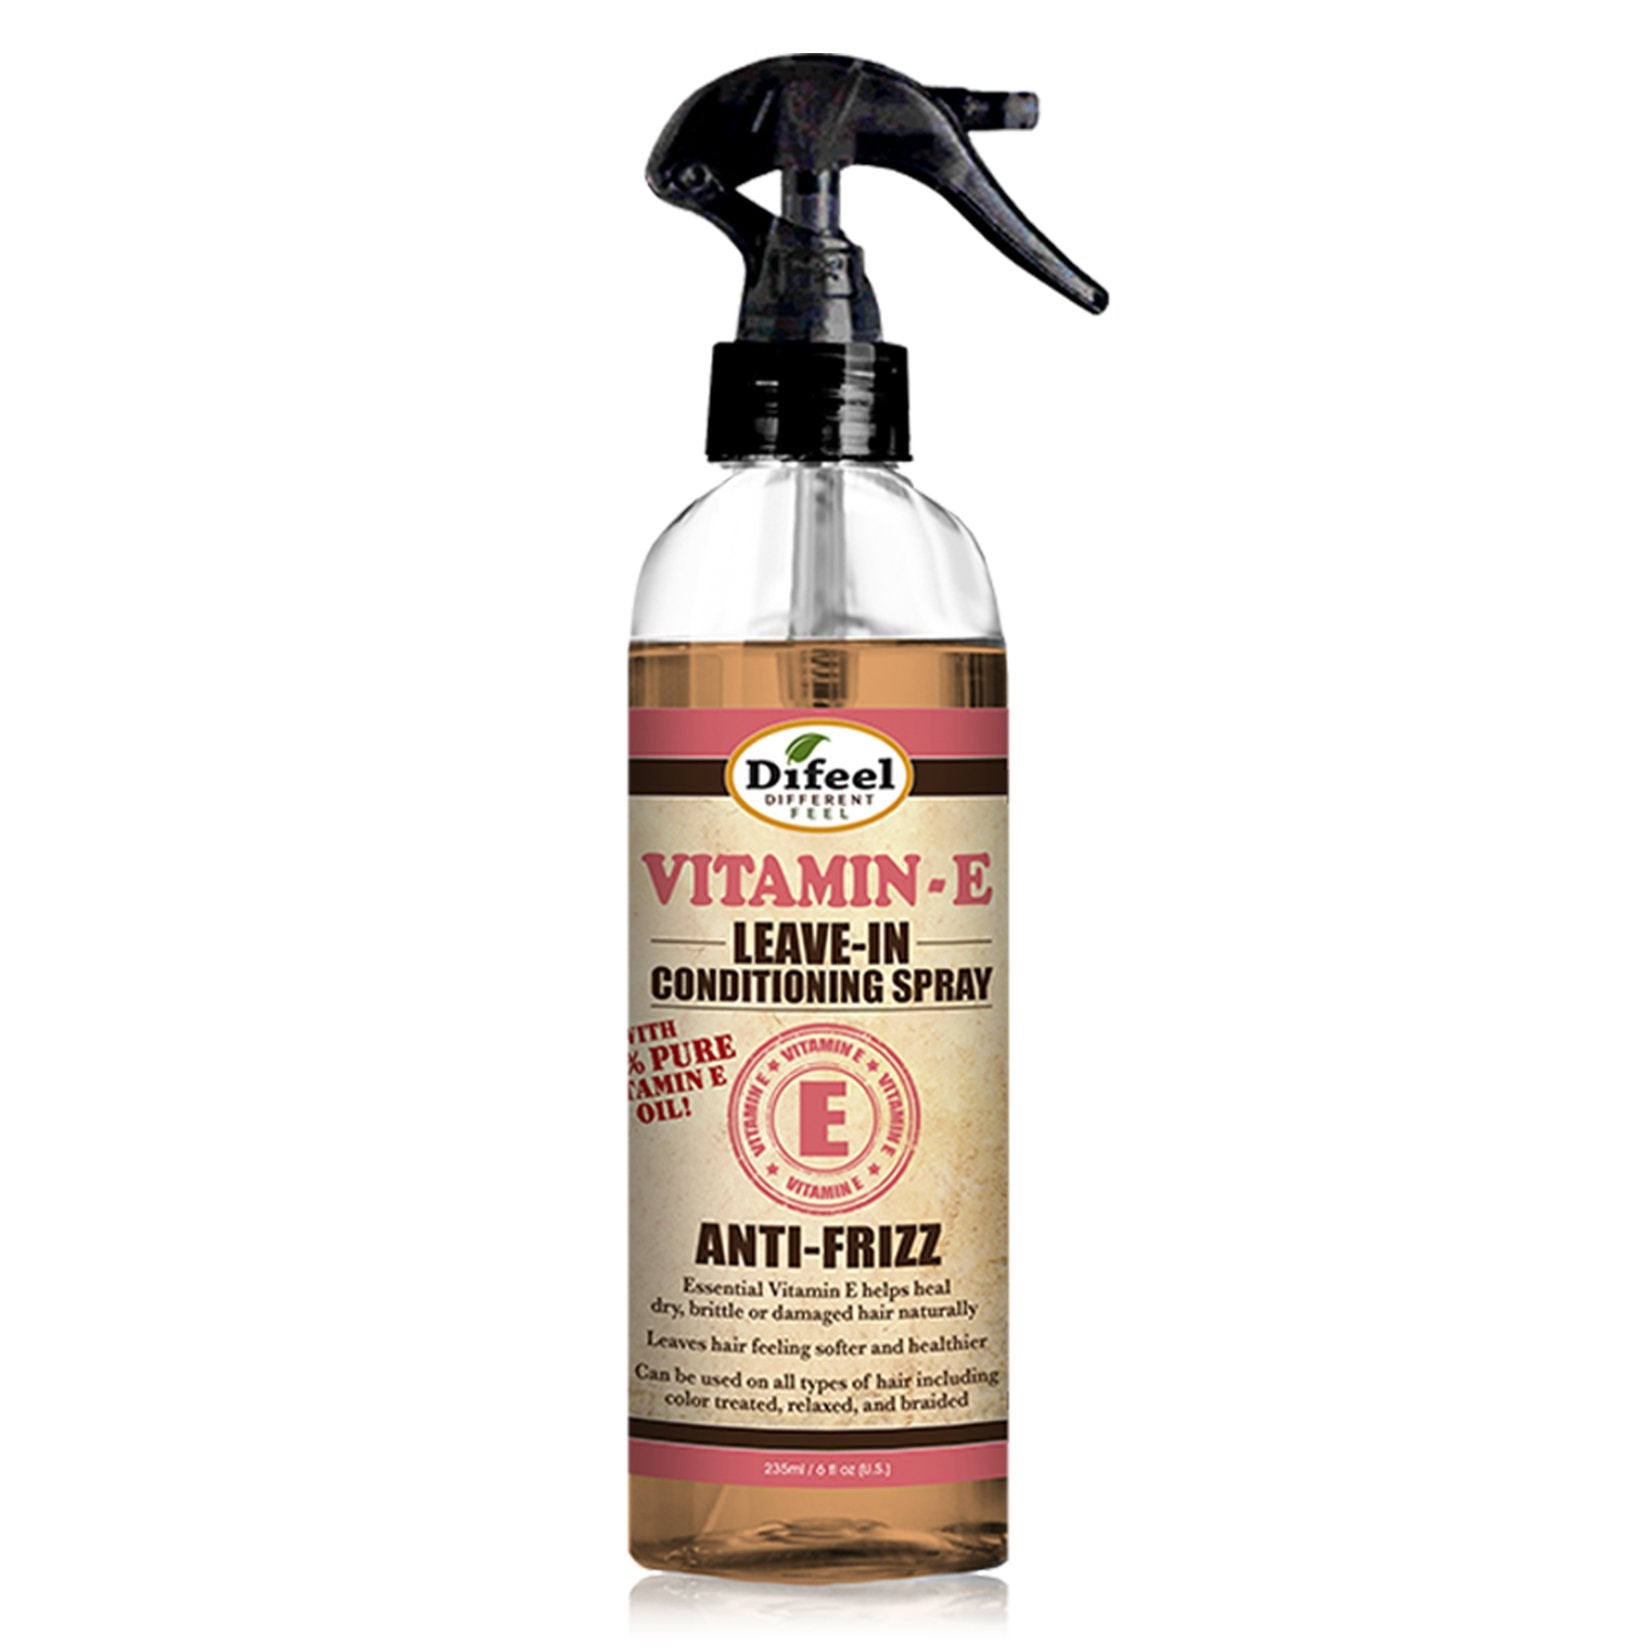 Difeel Anti-Frizz Leave in Conditioning Spray with 100% Pure Vitamin E Oil 6 oz. (PACK OF 2)